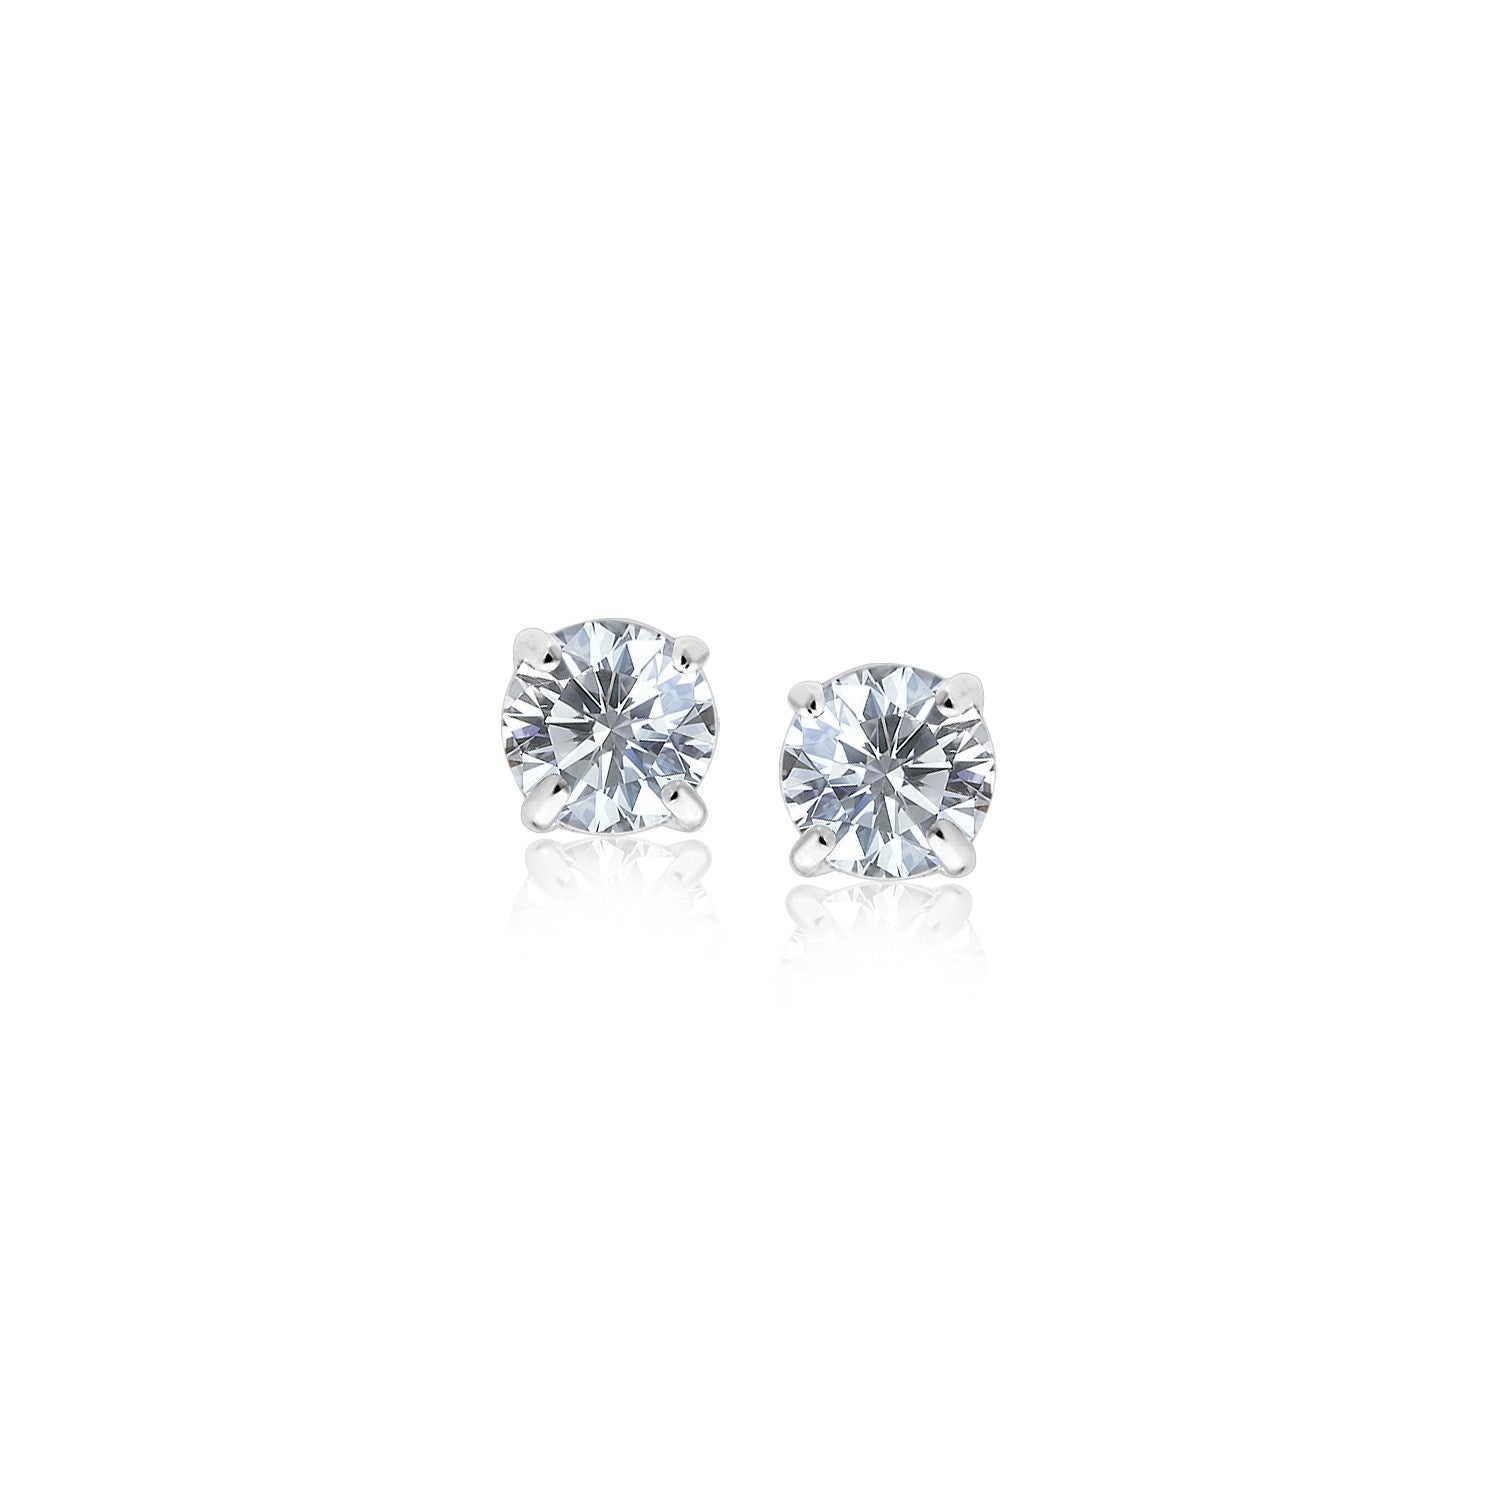 Sterling Silver 3mm Faceted White Cubic Zirconia Stud Earrings